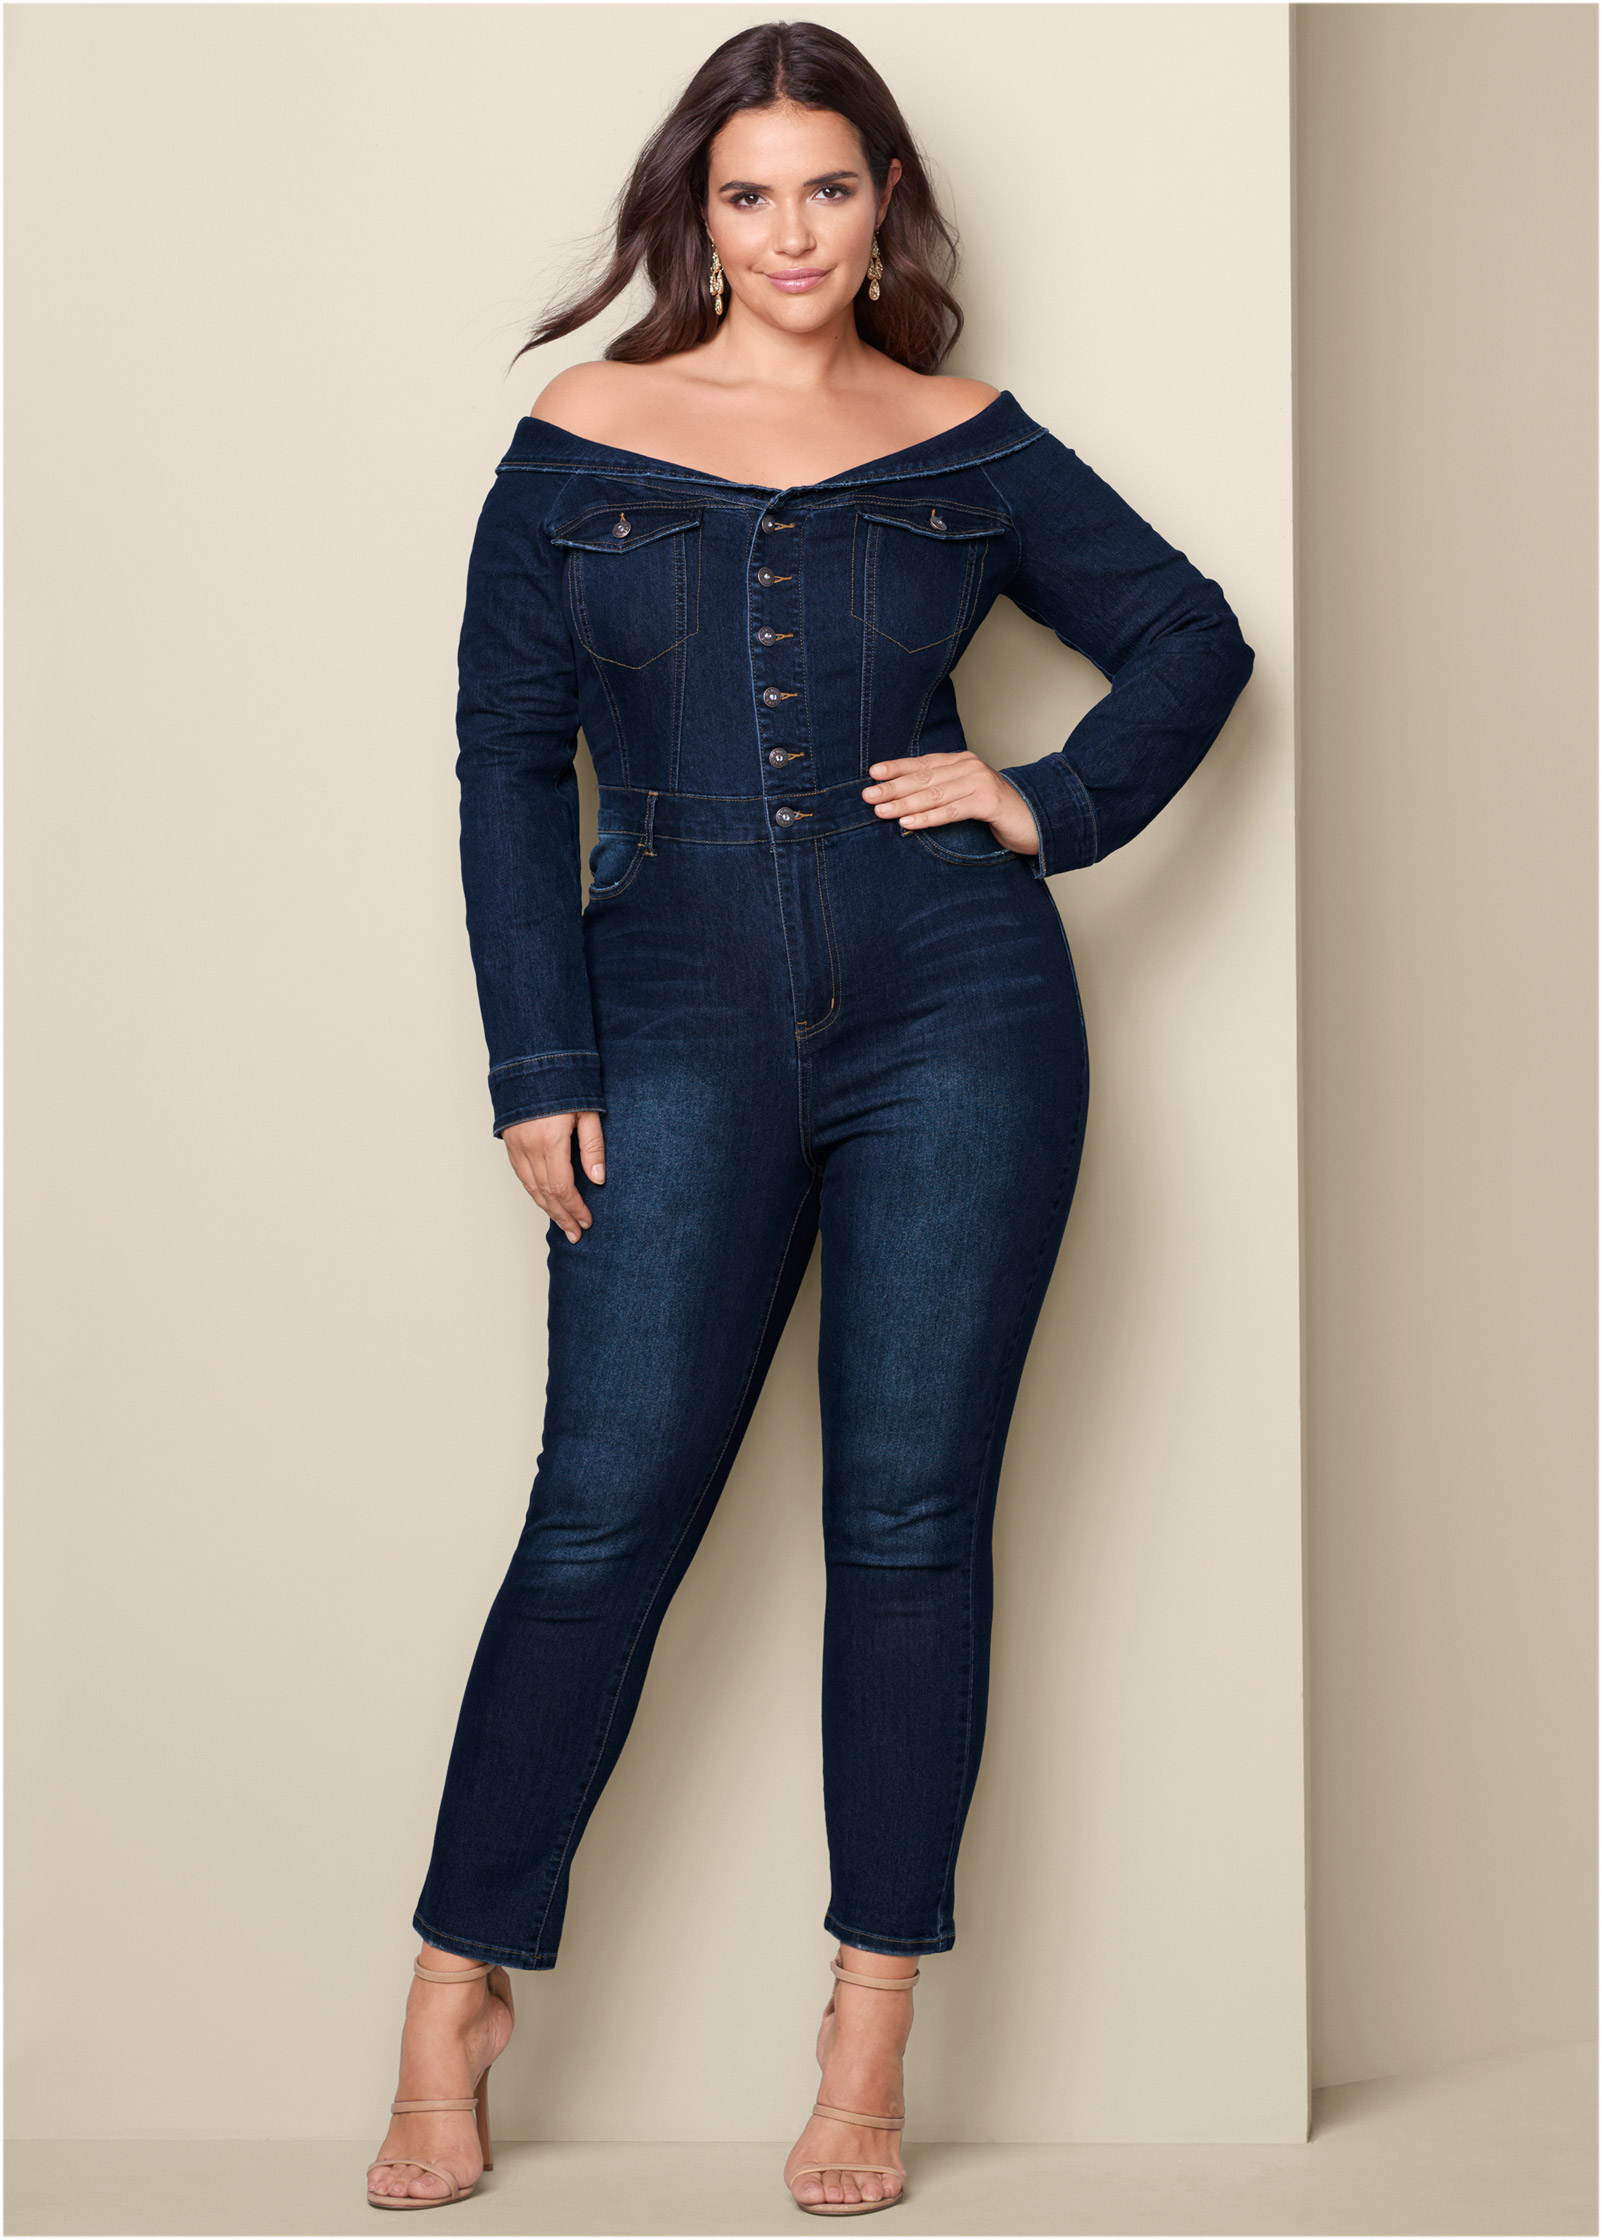 jean jumpers for plus size